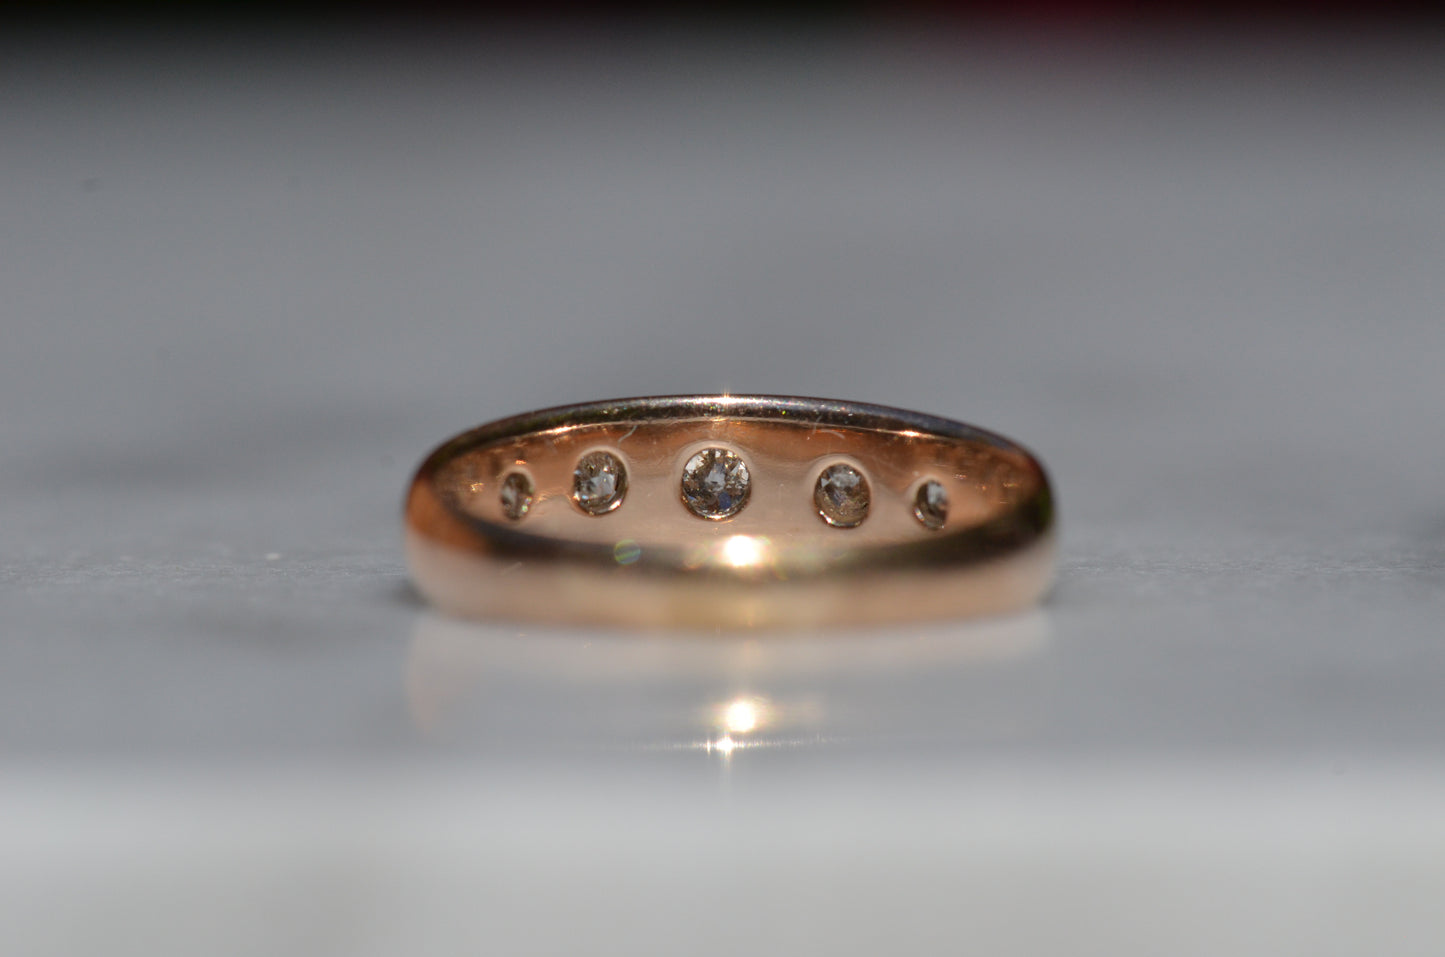 The ring is shown from behind, with the back of the mount in focus, showing the solid construction and smooth gold as well as the open backs behind each diamond setting.